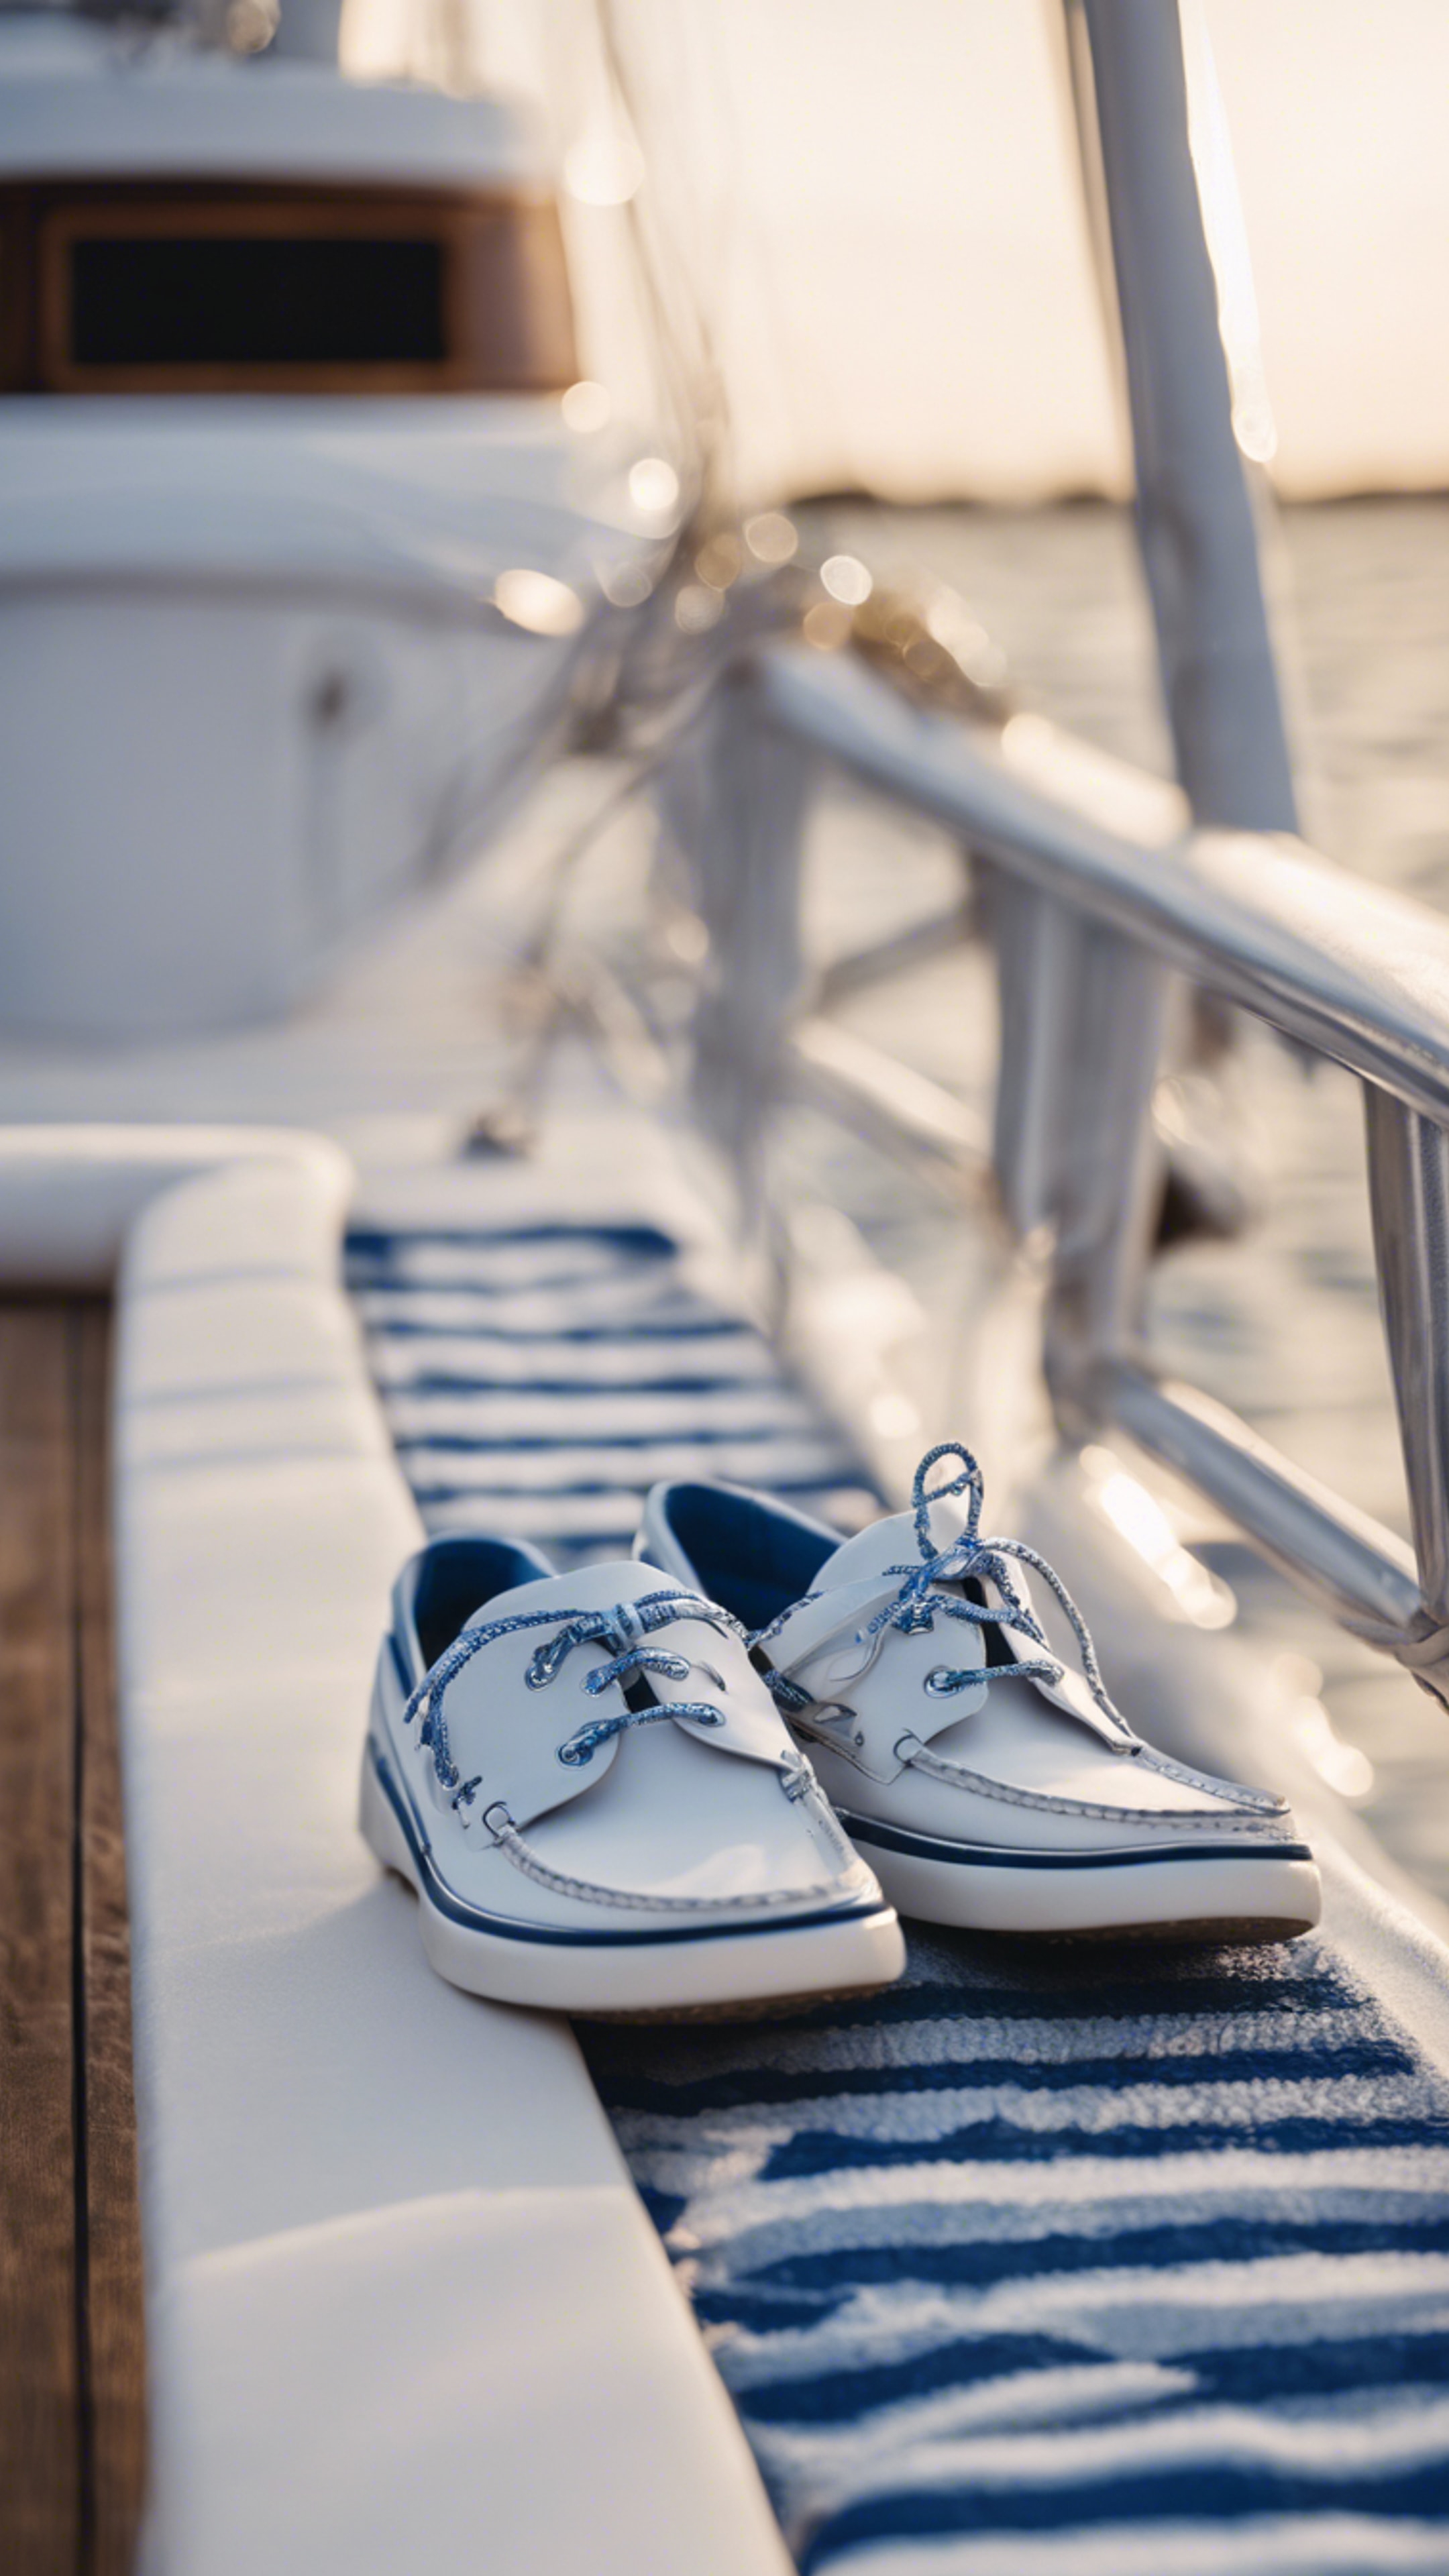 A pair of blue and white boat shoes resting on a yacht deck, reflecting preppy fashion. Wallpaper[e5e4a620cbd541dd8bee]